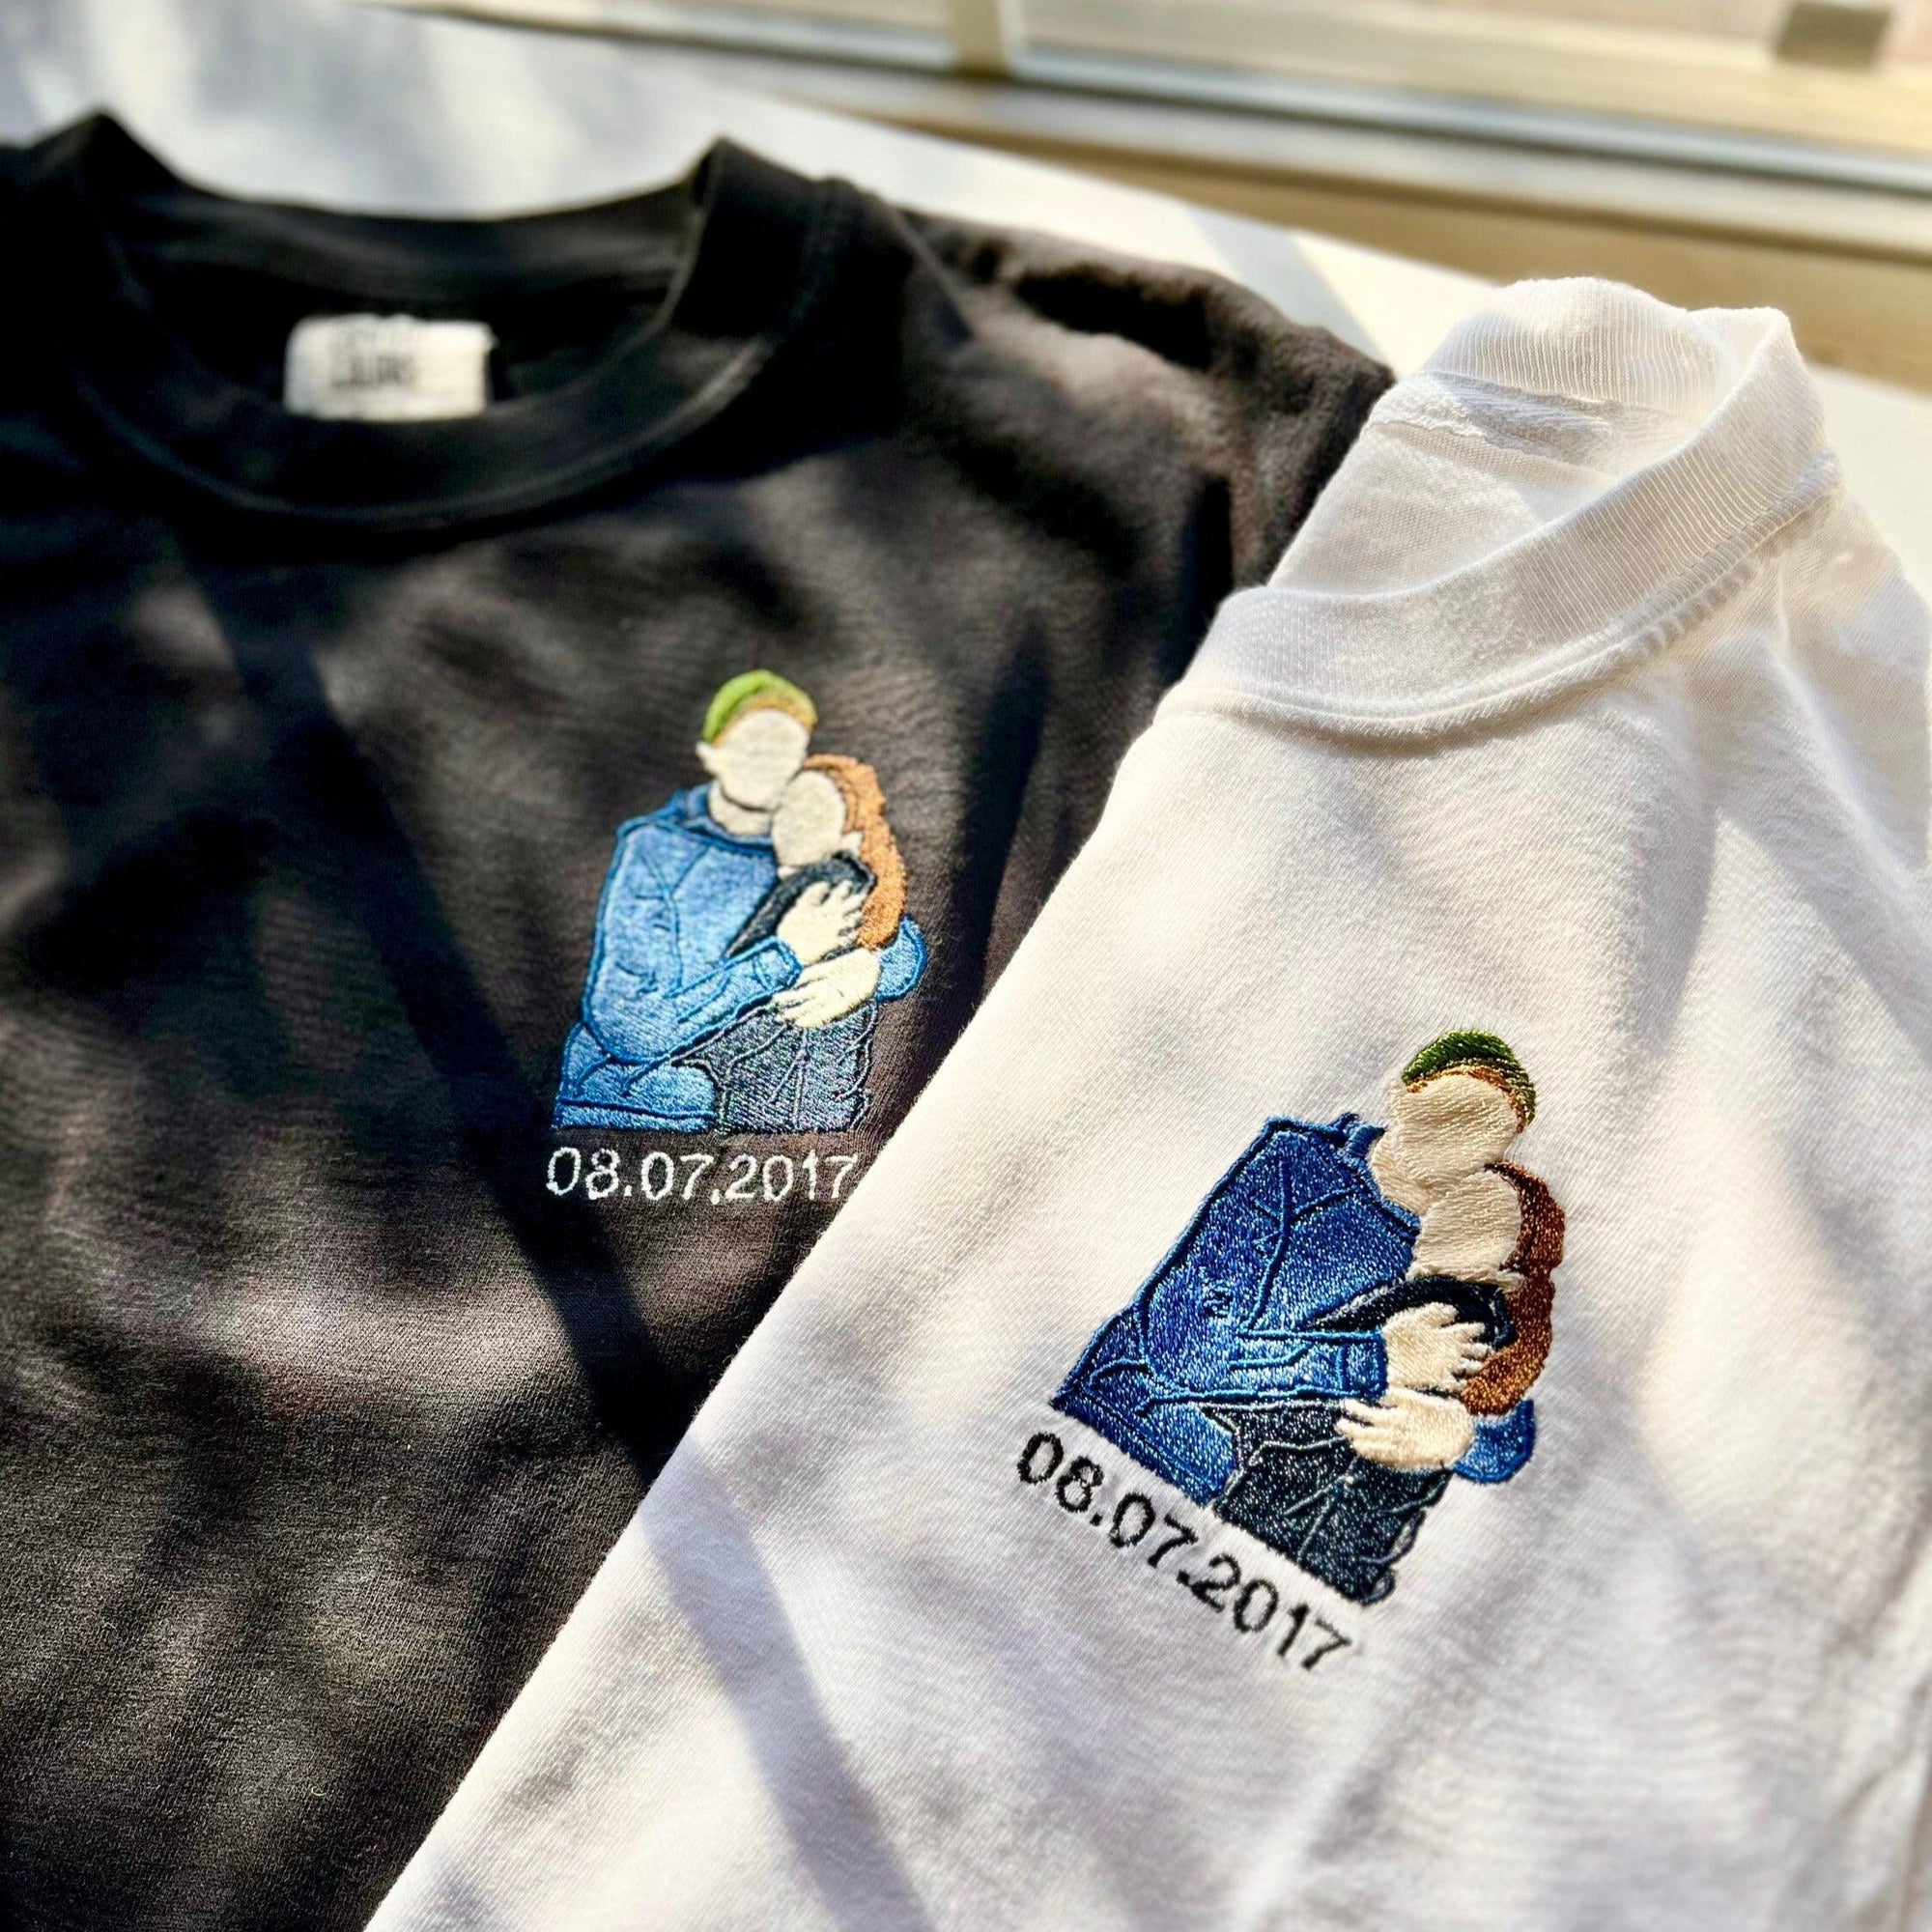 Personalized Embroidered Portrait From Photo Outline Couples Matching Embroidered Sweatshirt